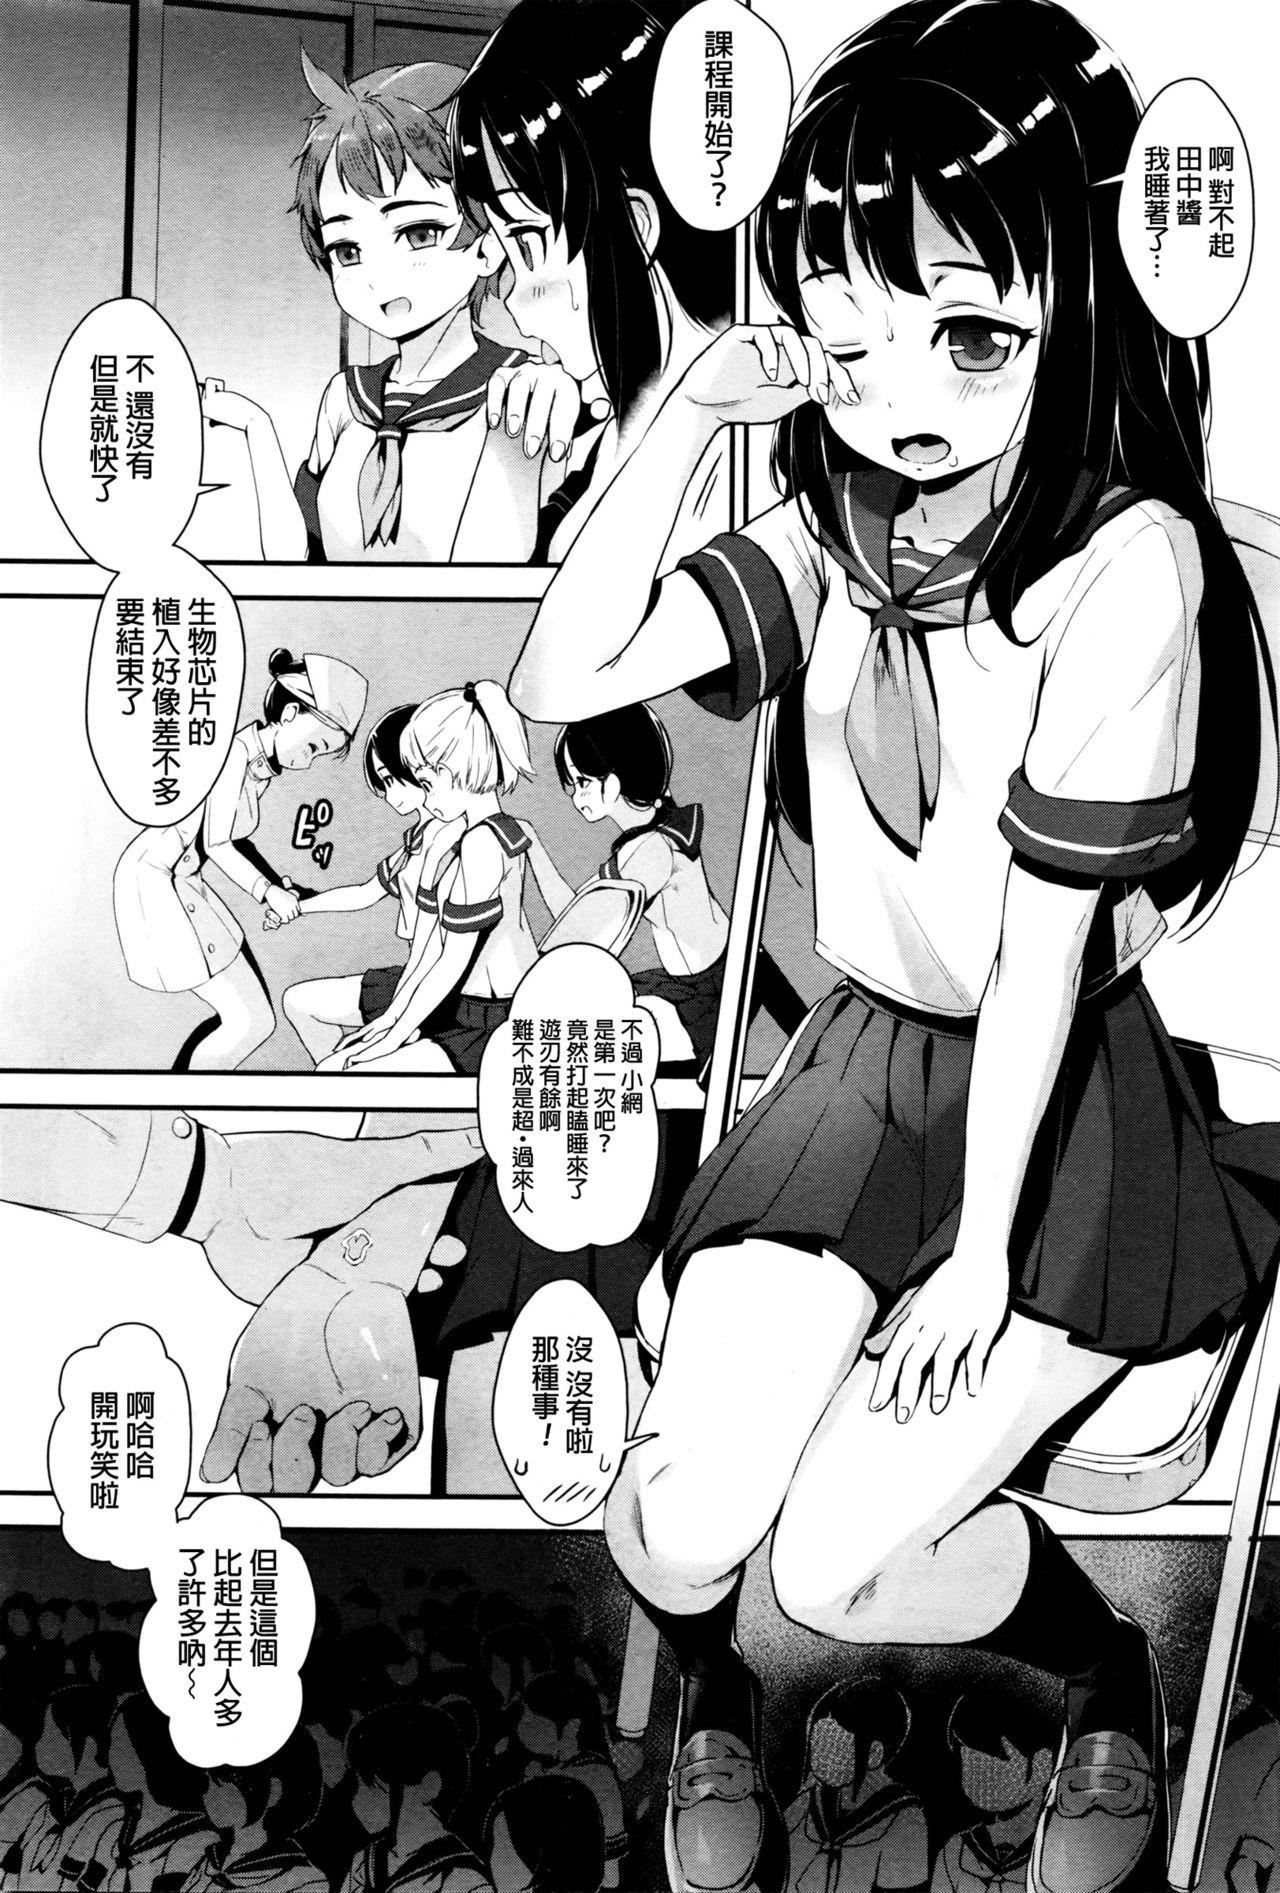 [Jairou] T.F.S - Training For Sex Ch. 1-3 [Chinese] 3